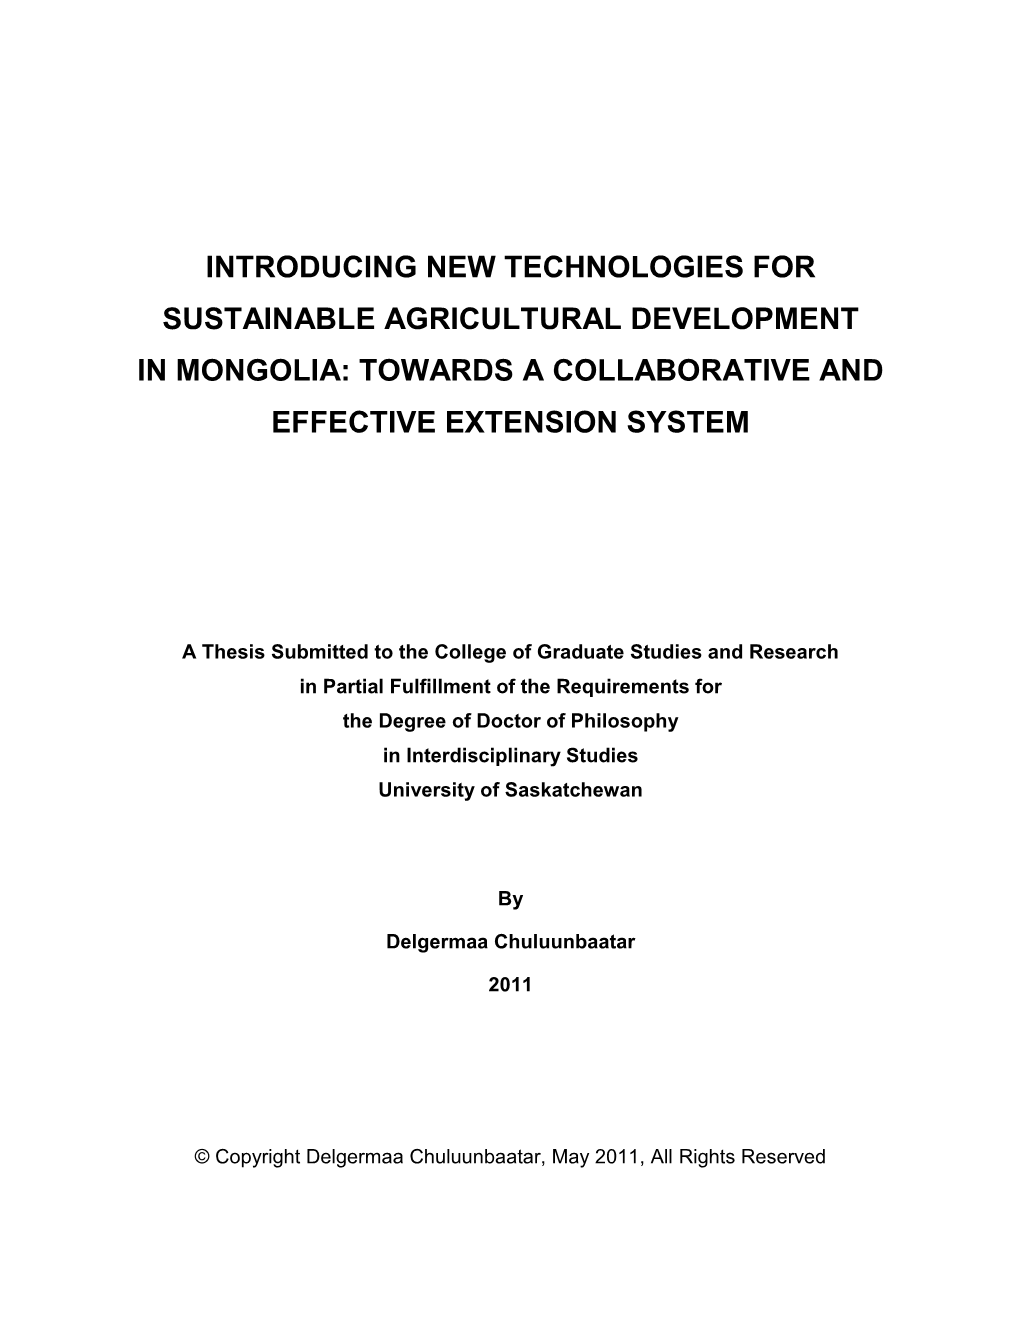 Introducing New Technologies for Sustainable Agricultural Development in Mongolia: Towards a Collaborative and Effective Extension System